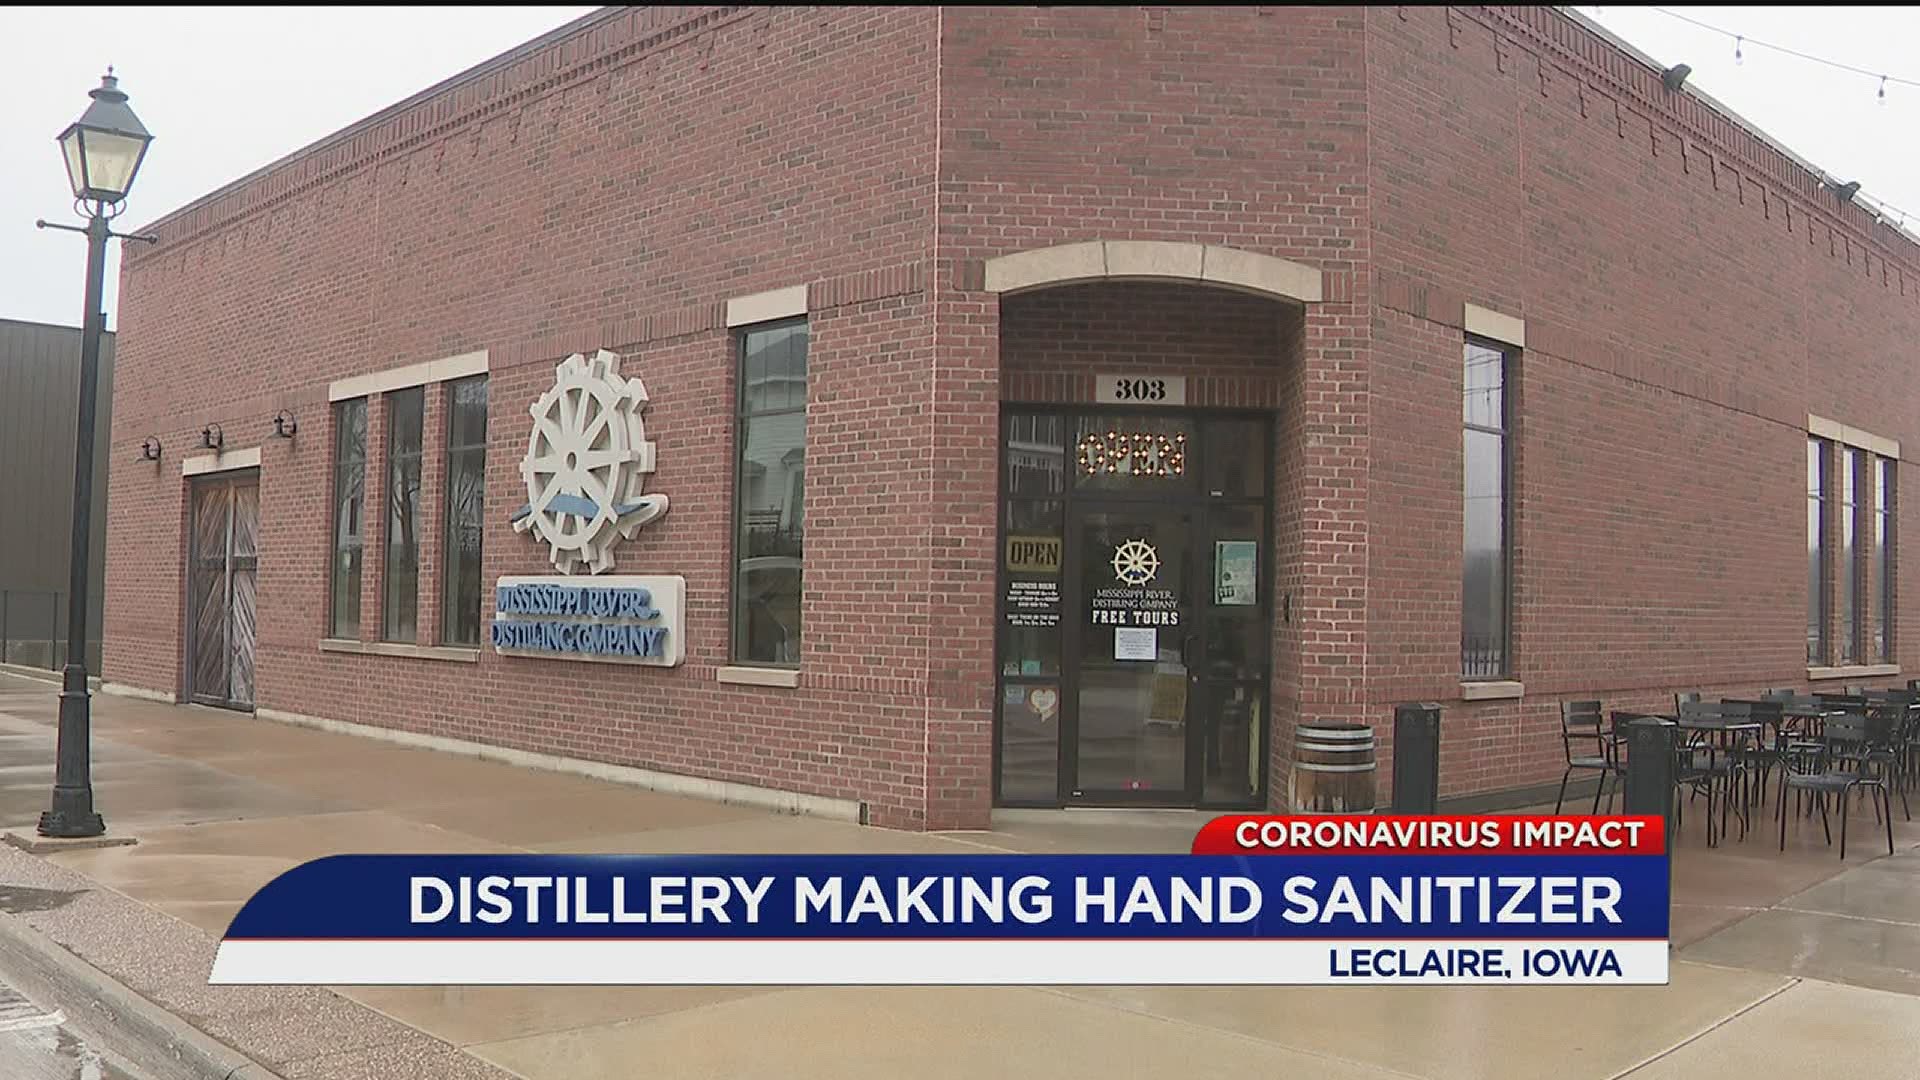 From Brewery to Sanitizer